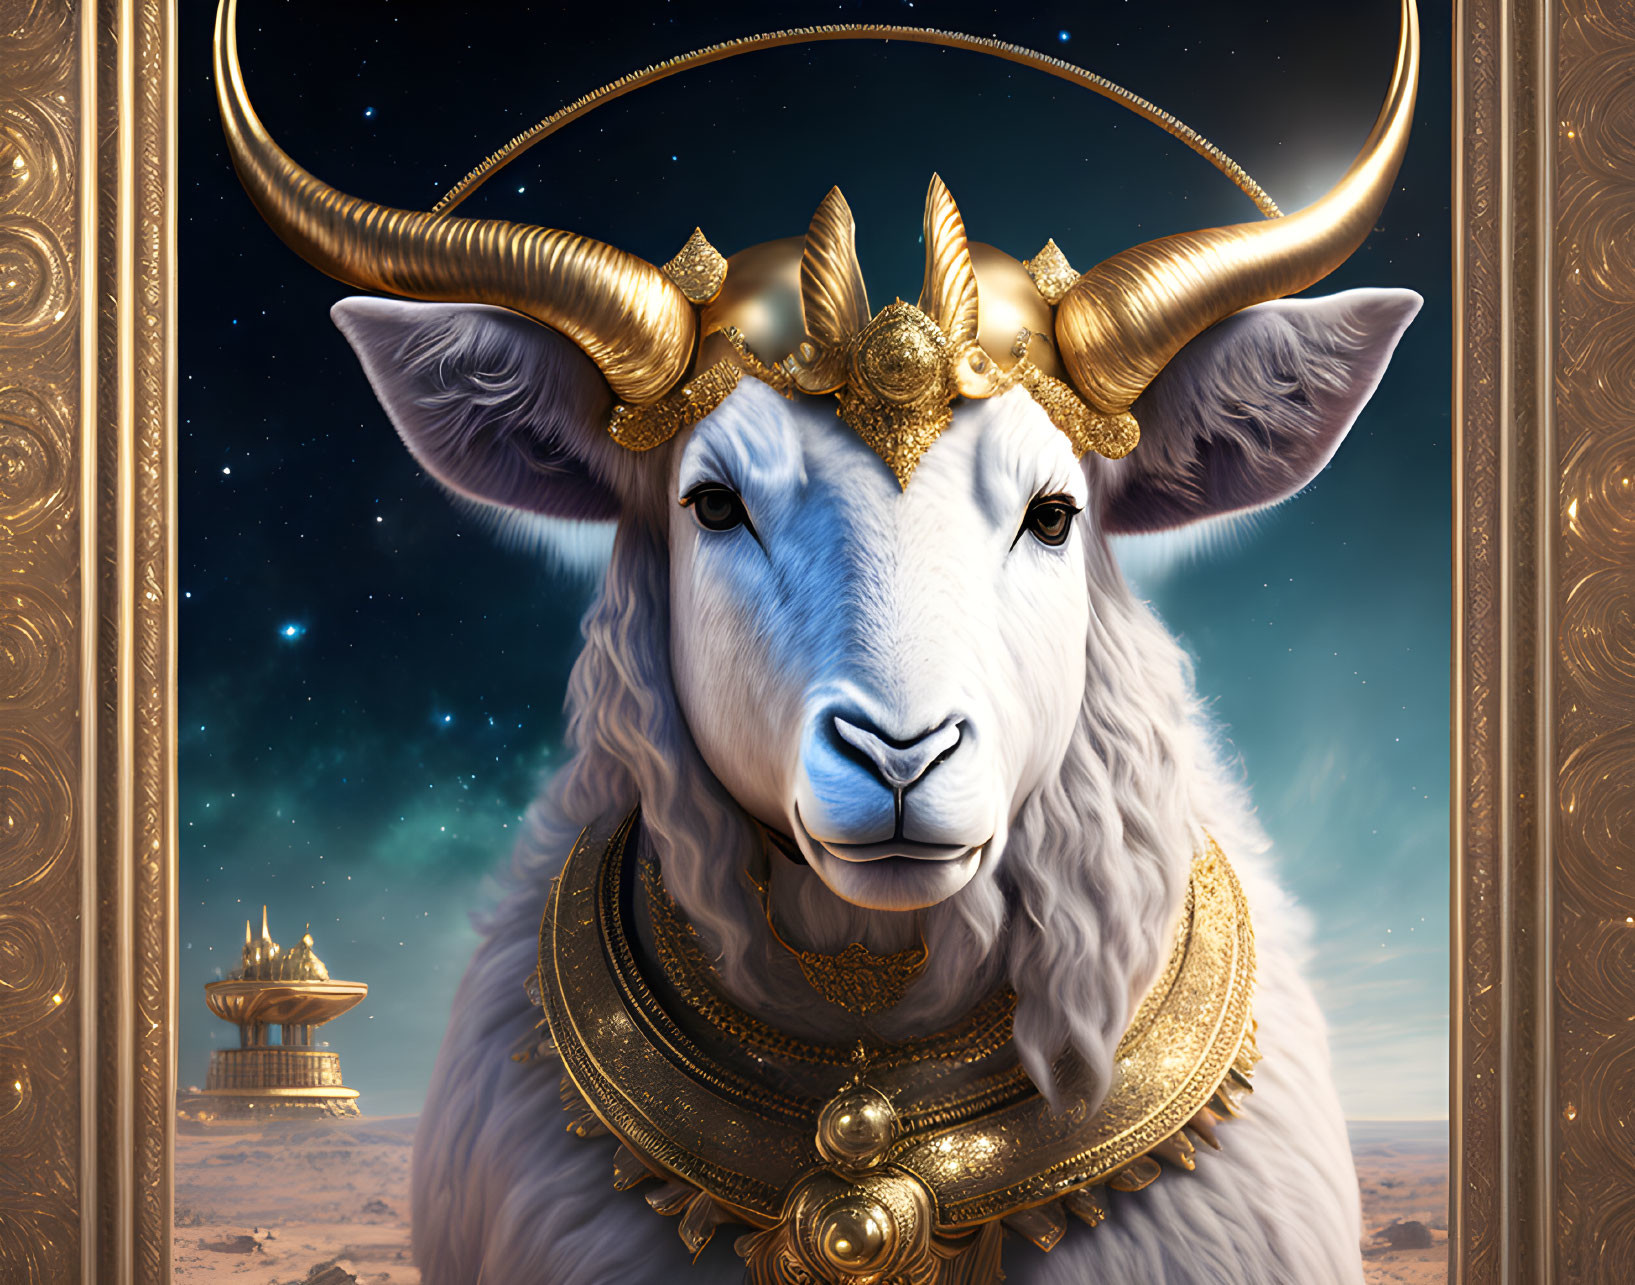 White Goat with Golden Horns and Jewelry in Desert Landscape and Starry Sky